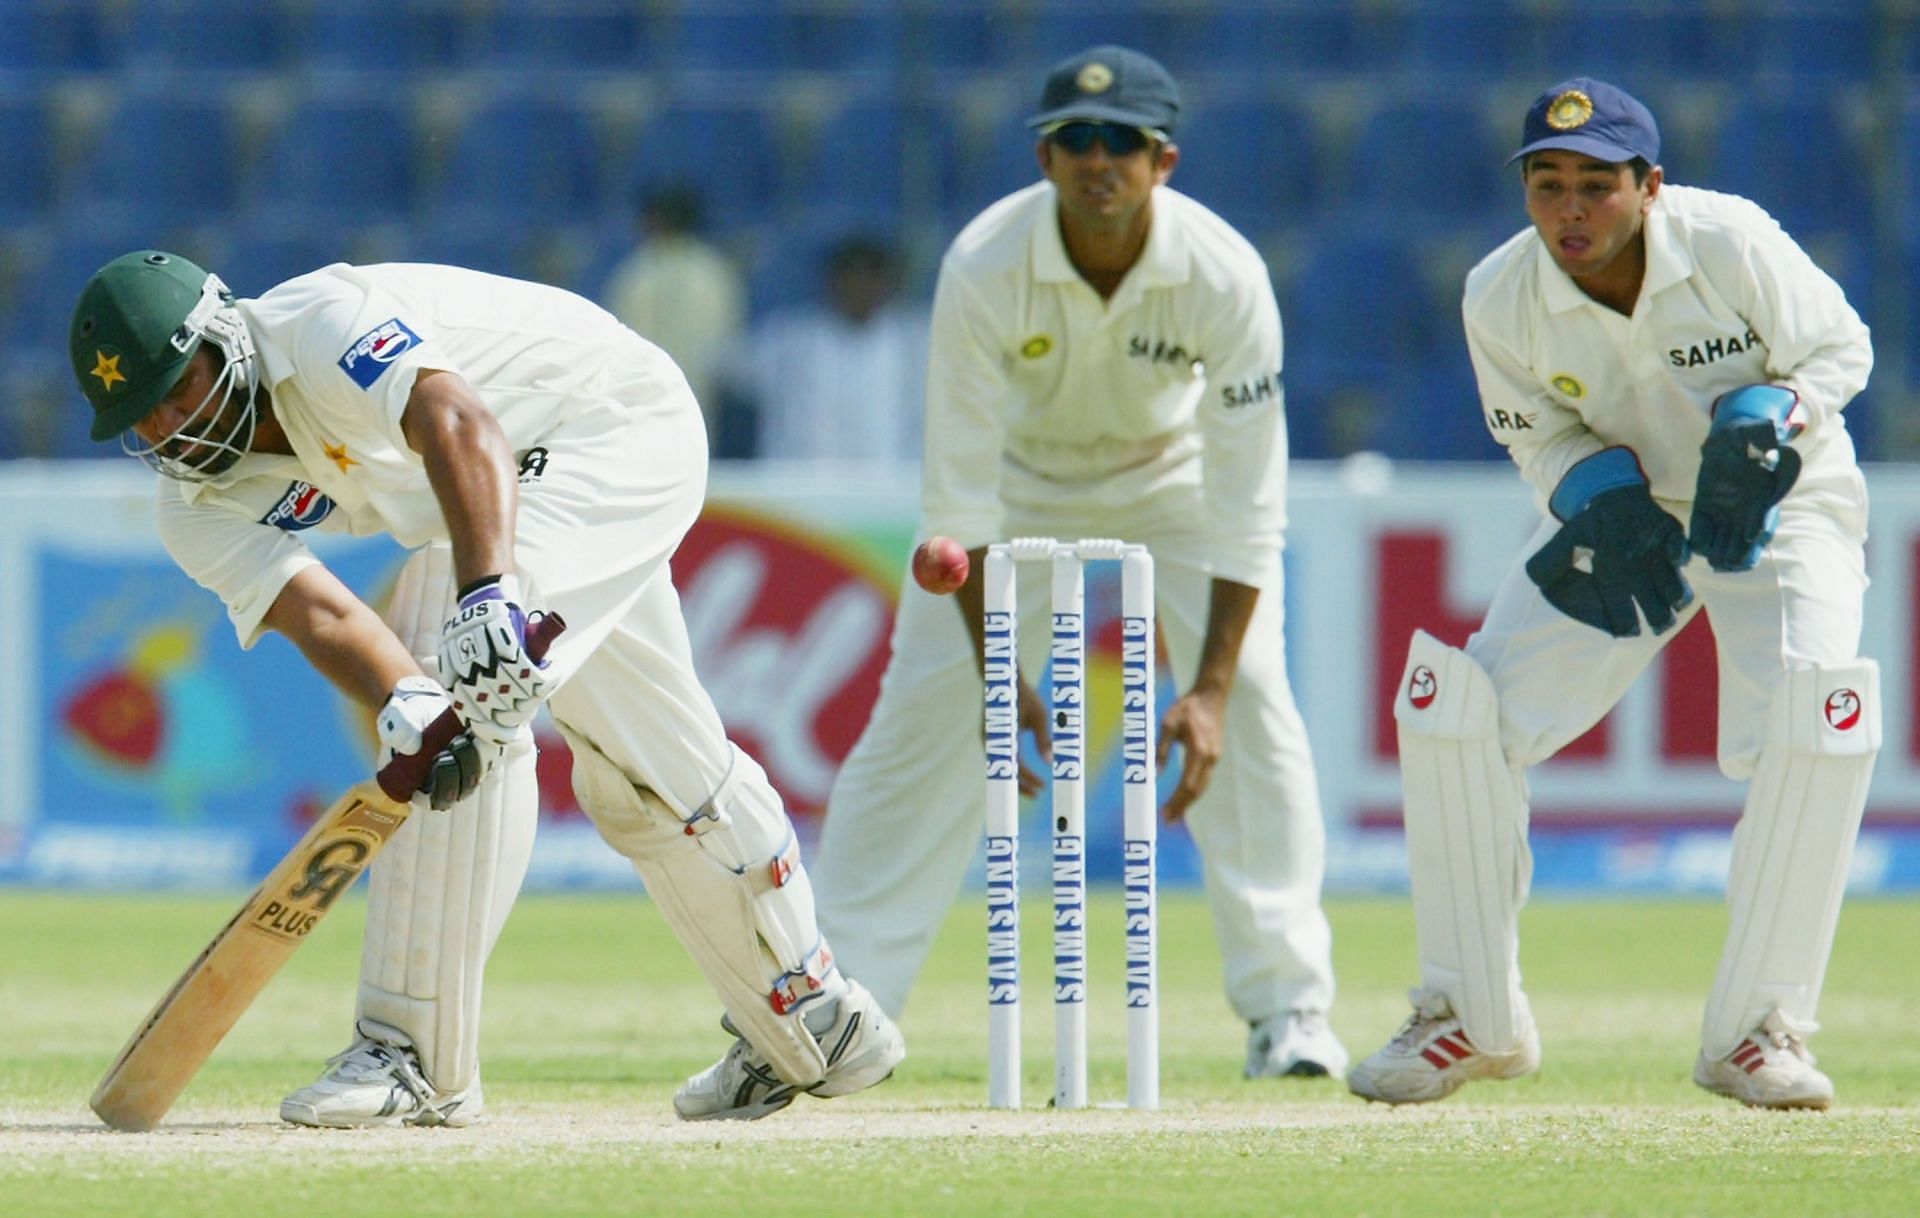 Former Pakistan captain Inzamam-ul-Haq bats in a Test match against India. Pic: Getty Images